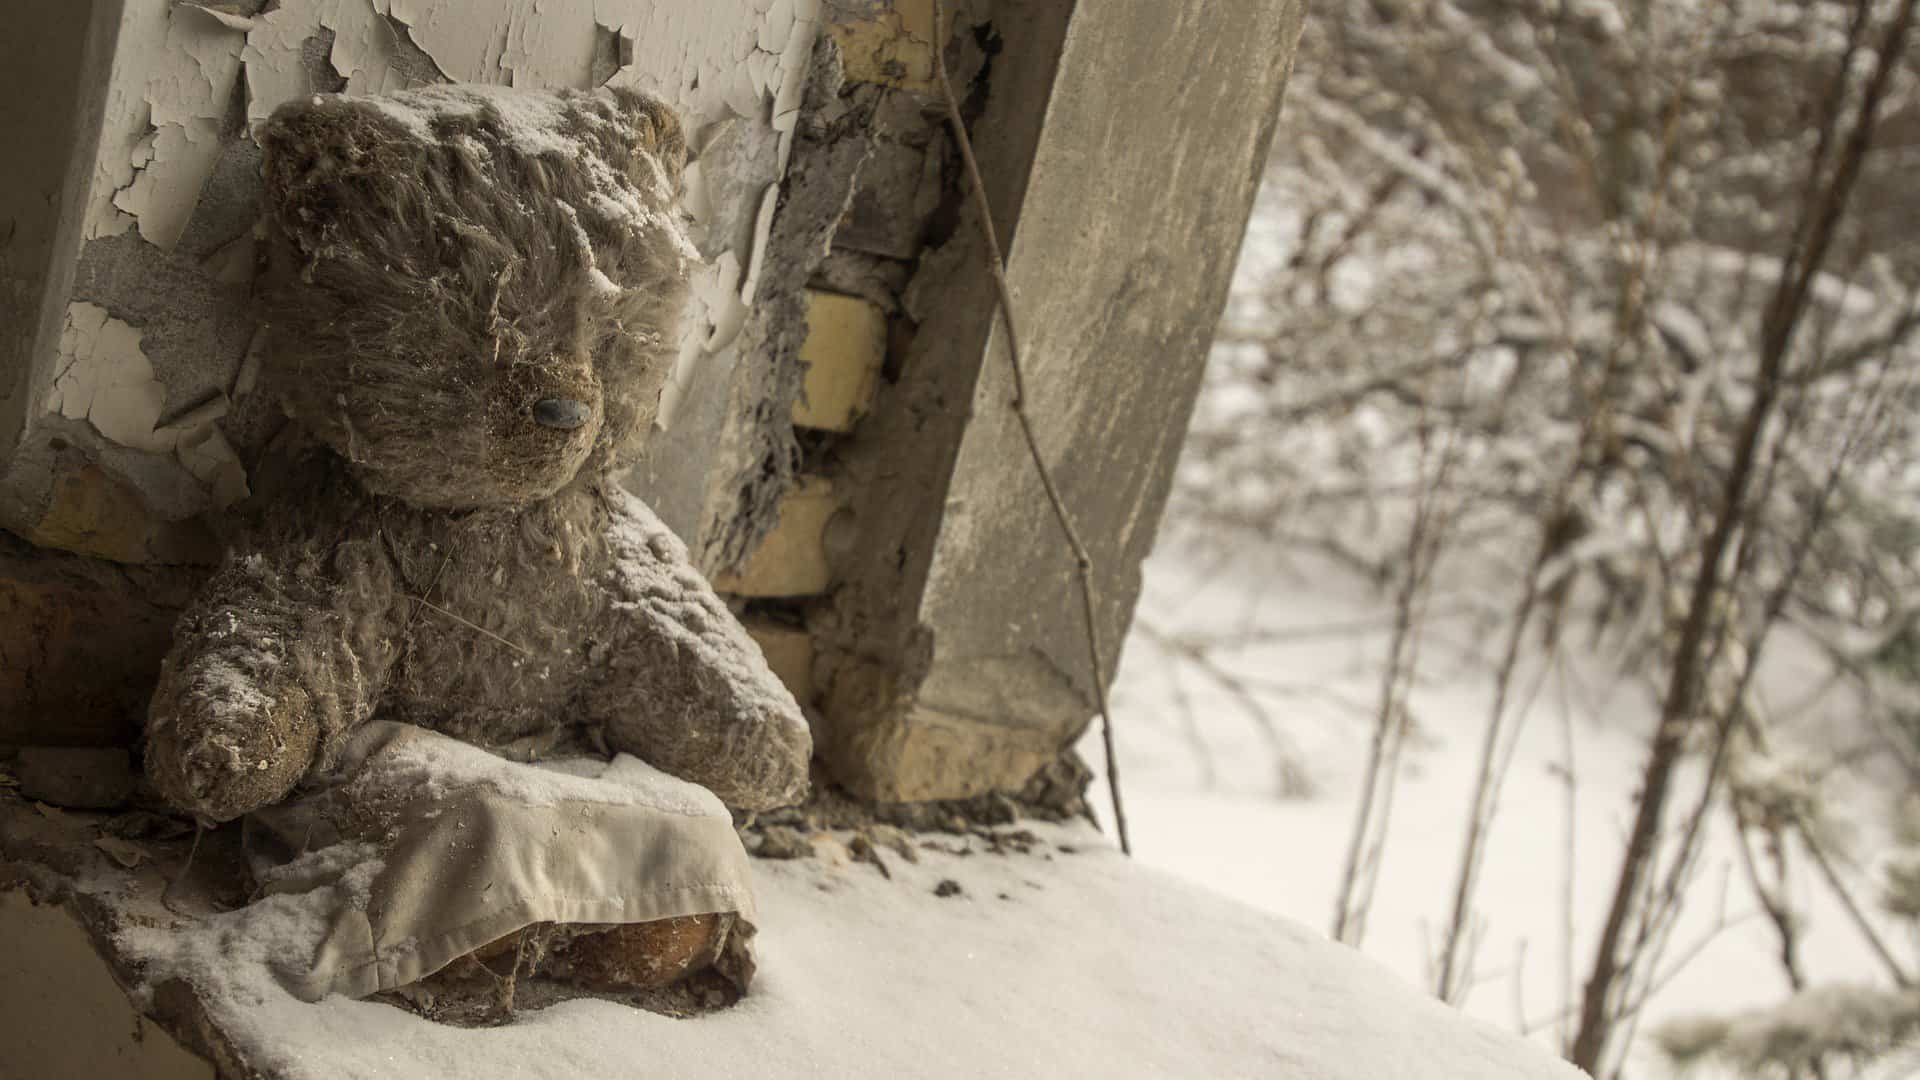 a sepia colored photo showing a well worn teddy bear covered in snow and sitting in a window frame of a derelict building